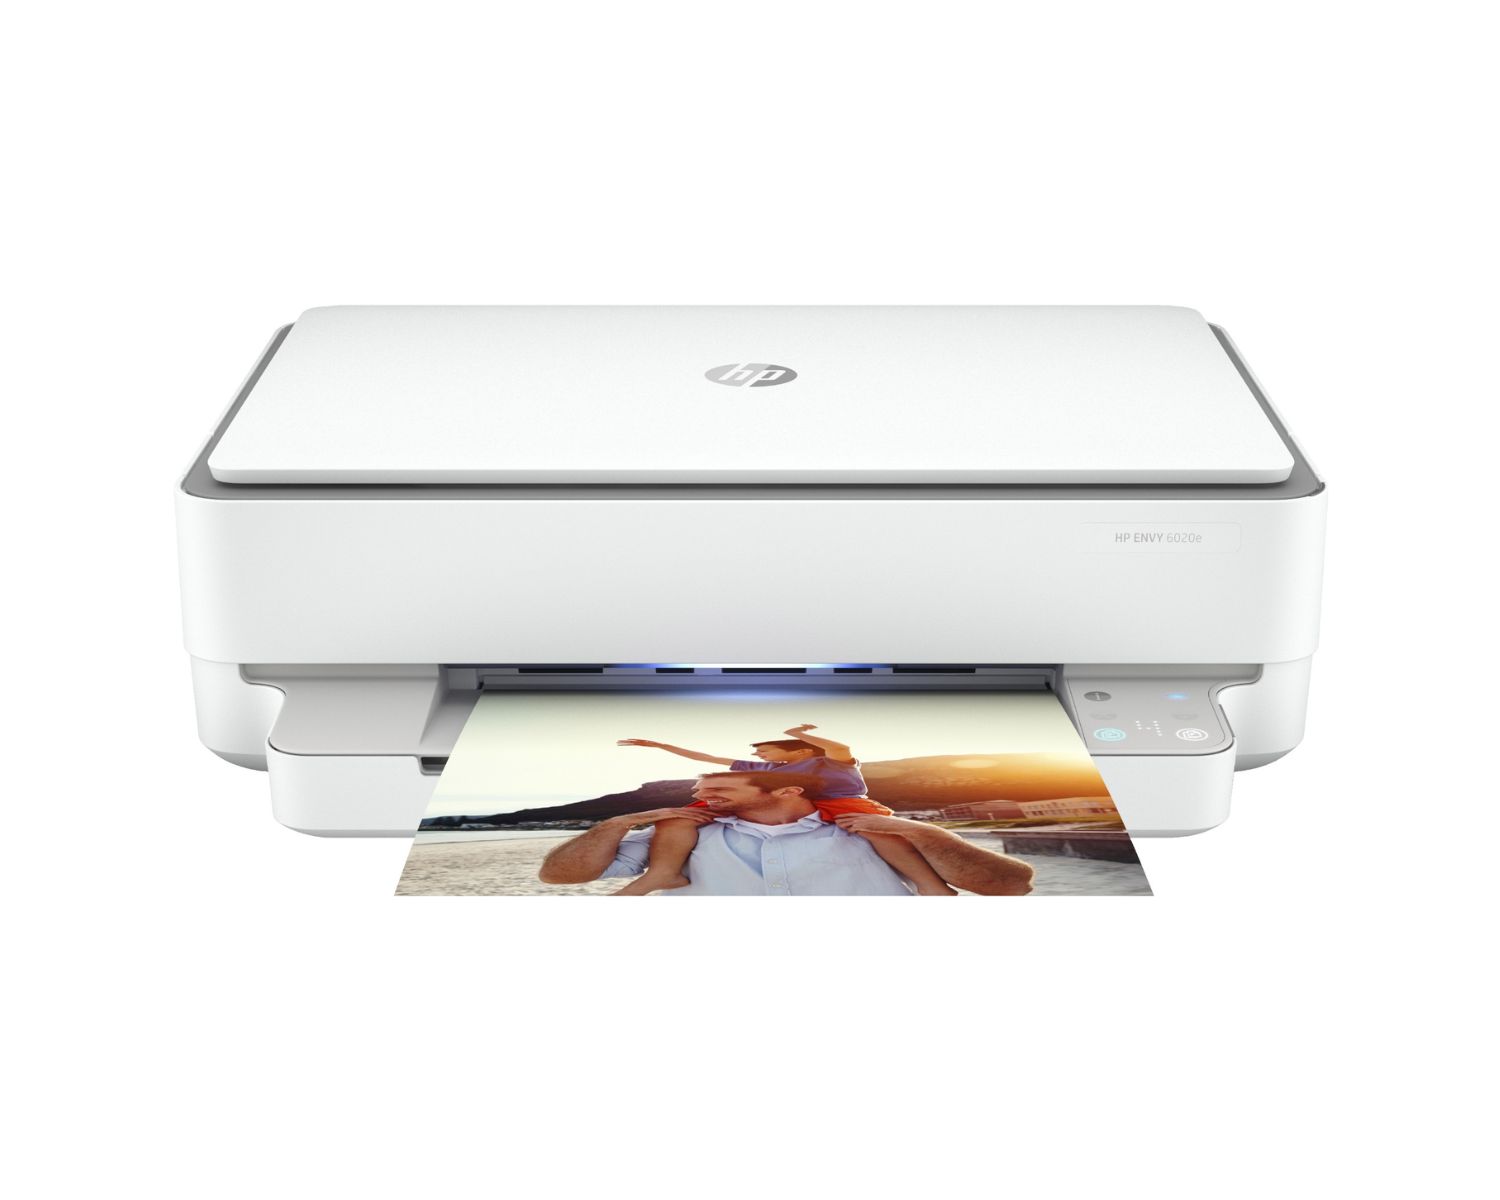 How To Print Pictures On HP Printer